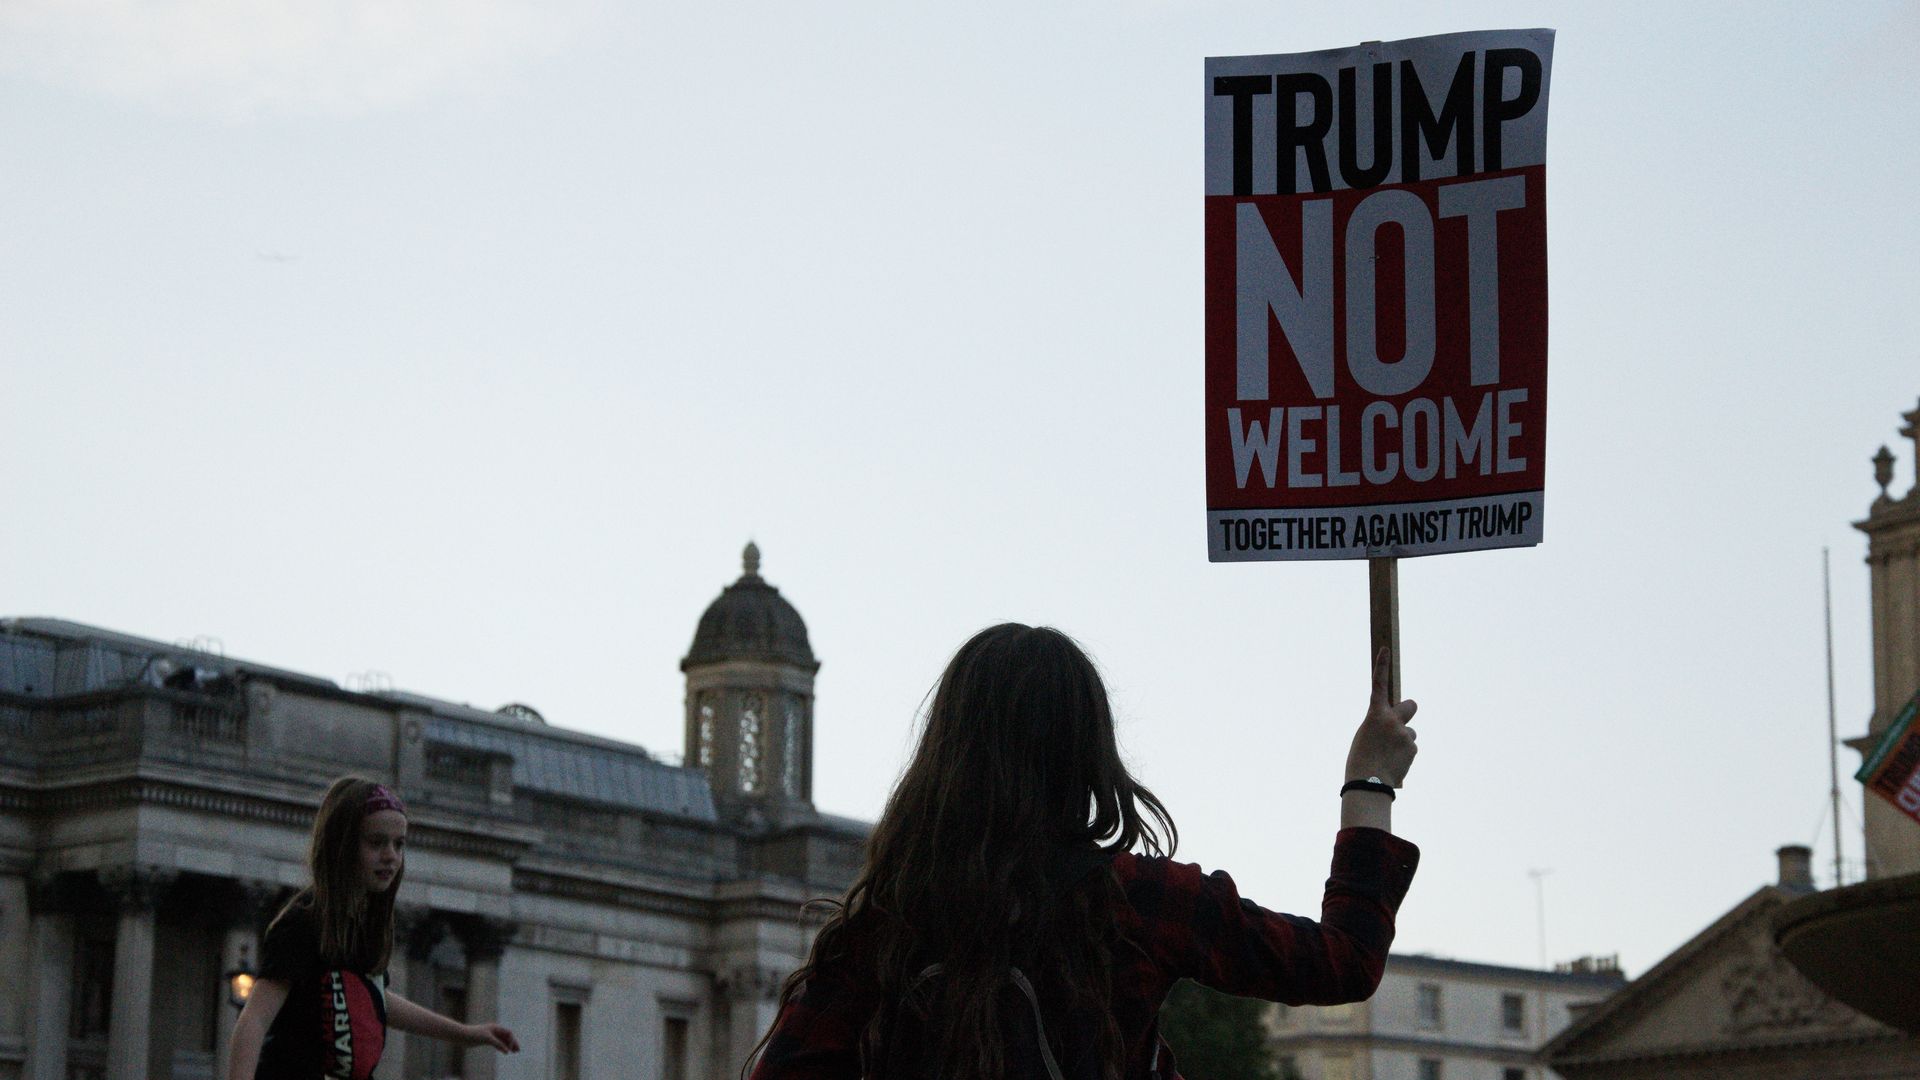 Thousands of protesters marched through central London in protest of Donald Trump's visit on Friday 13, July 2018. The organizers identified the turnout to be 250,000 people once the protest began. 